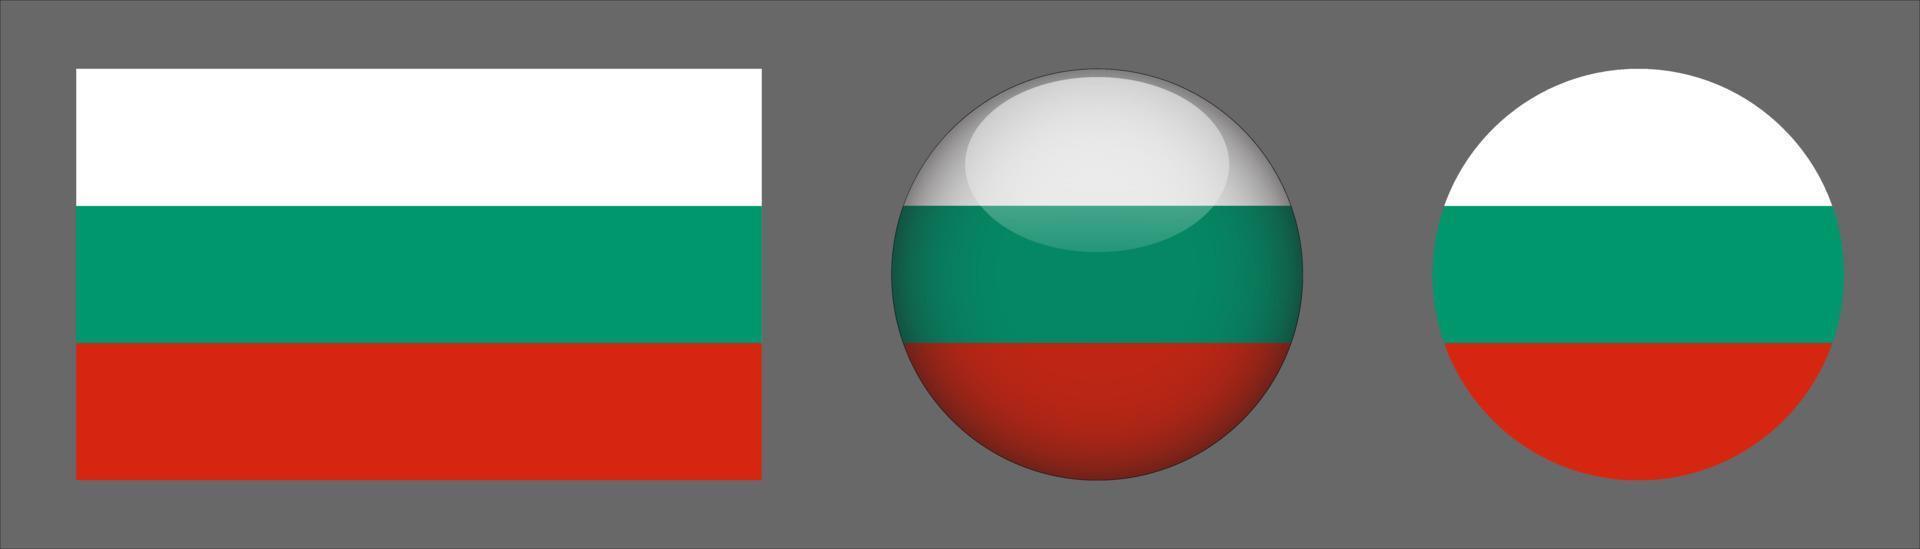 Bulgaria Flag Set Collection, Original Size Ratio, 3d Rounded and Flat Rounded vector